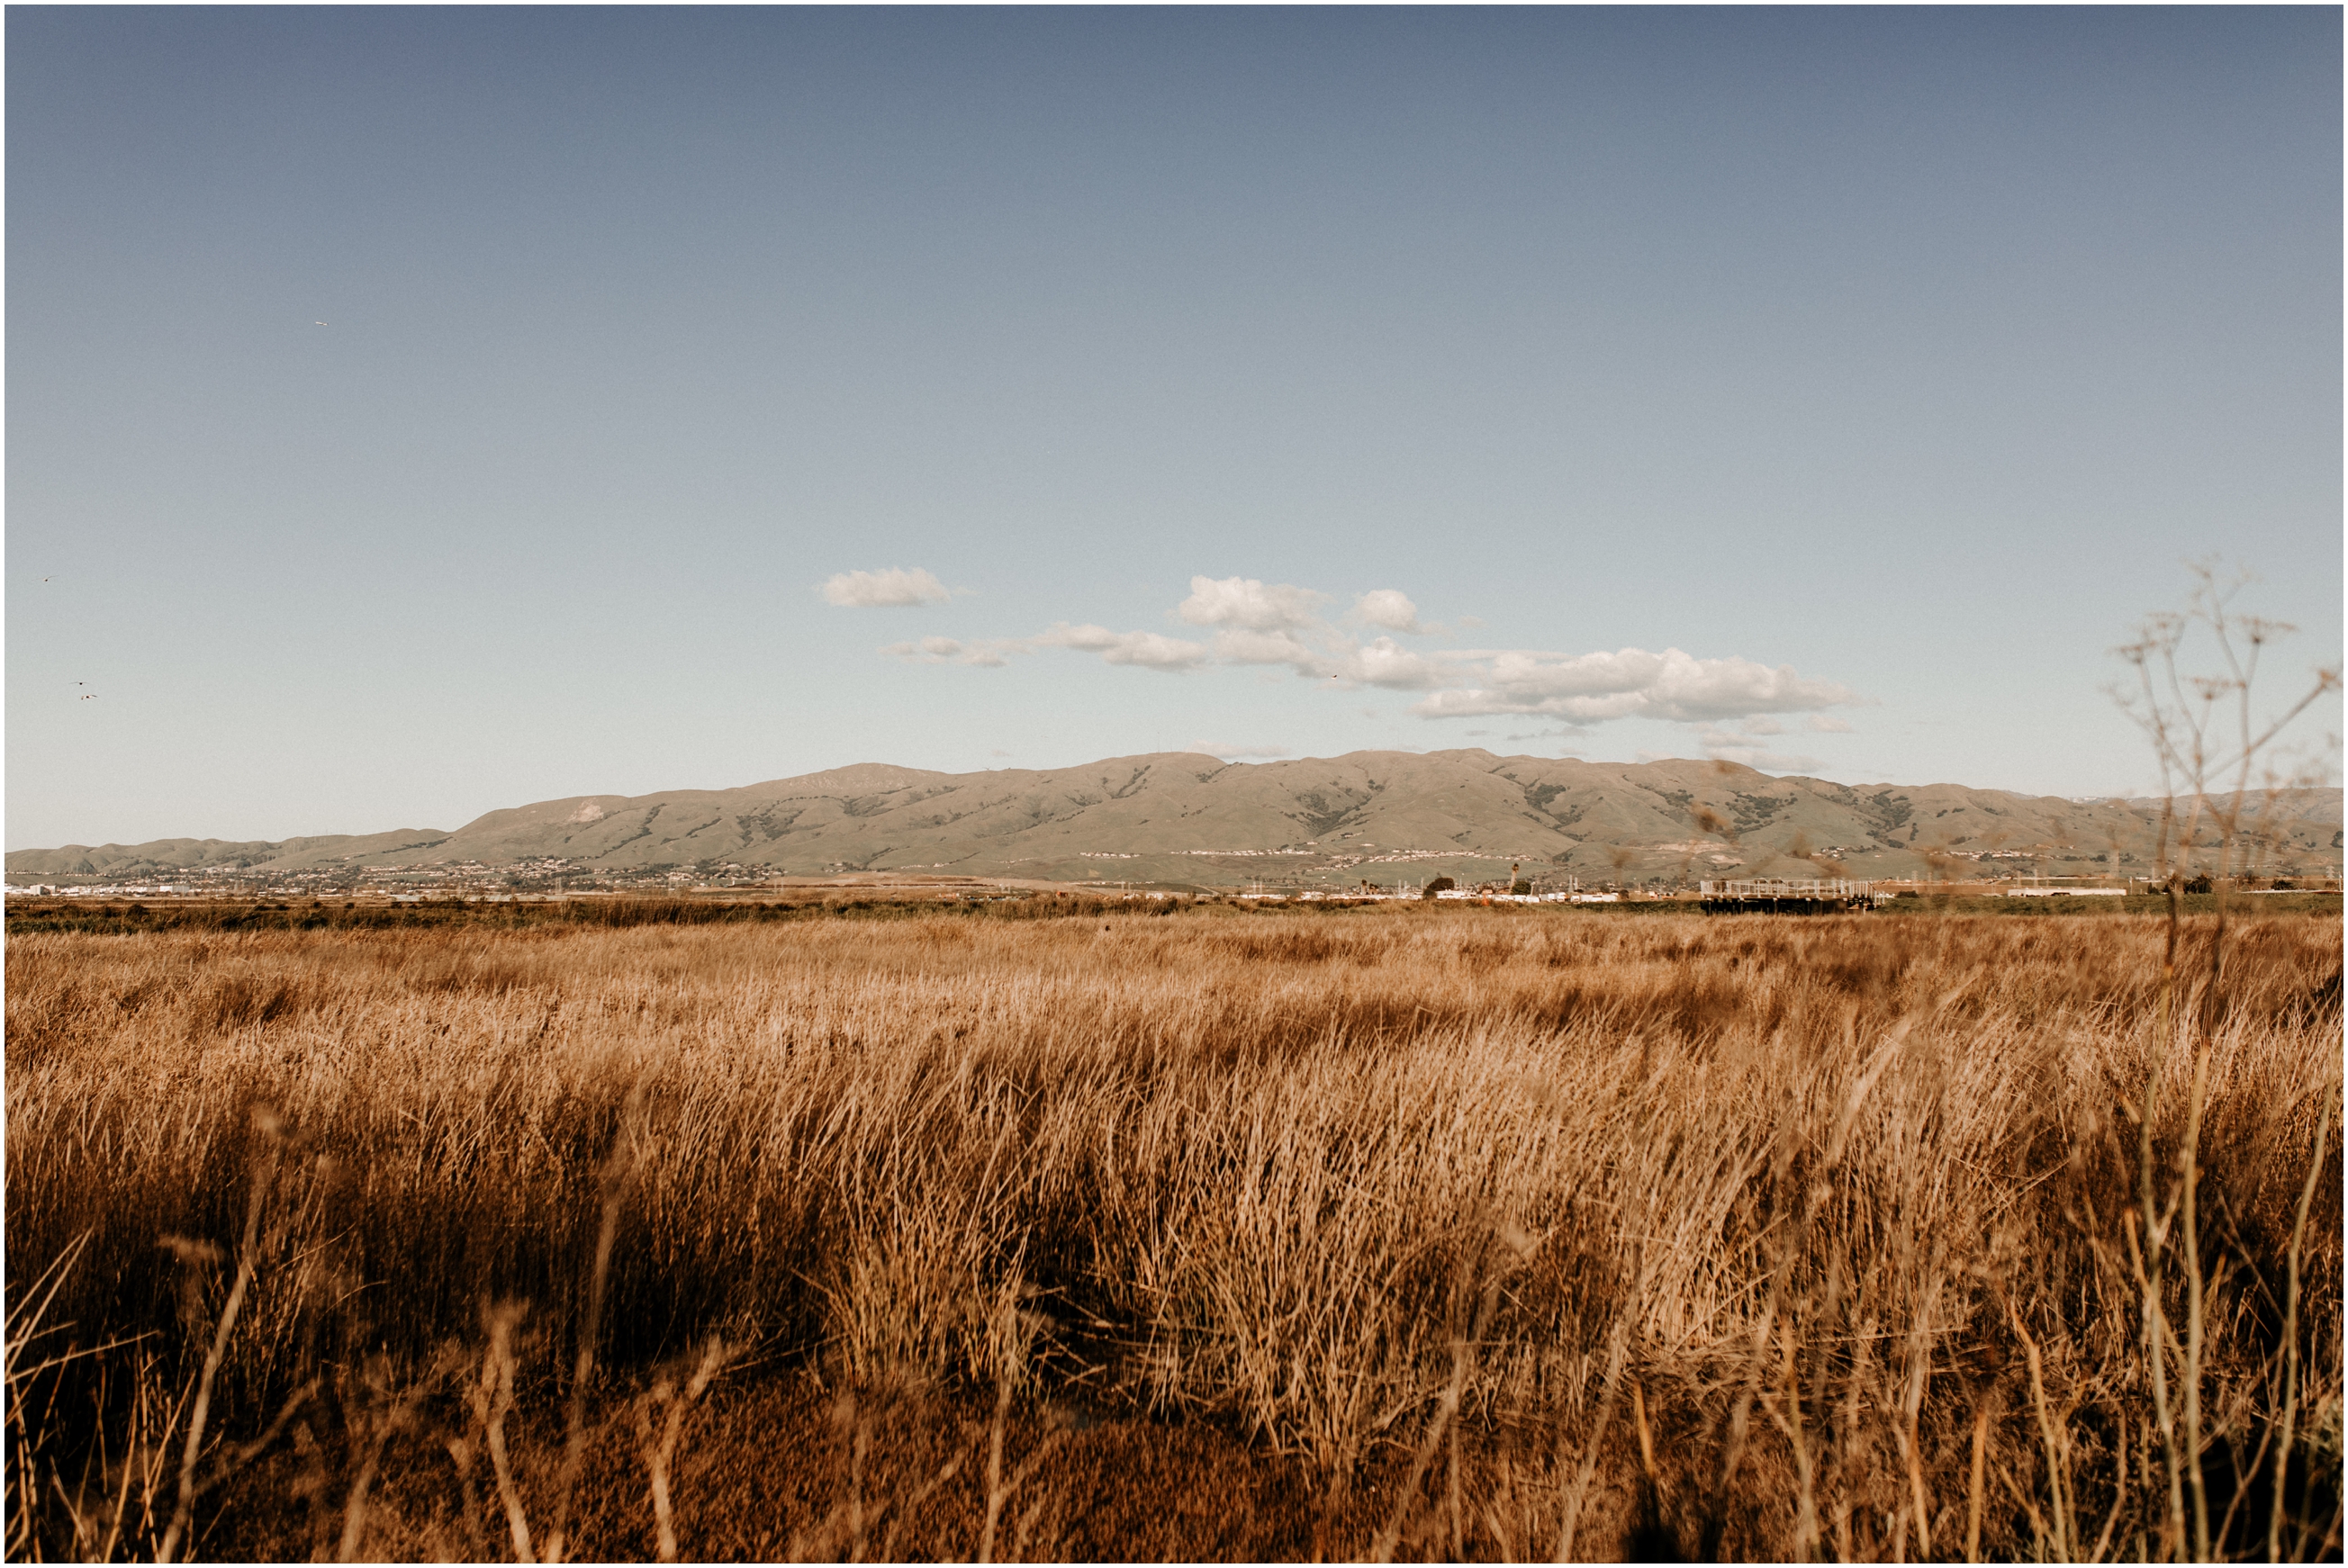 landscape of swamp grass and mountains in background